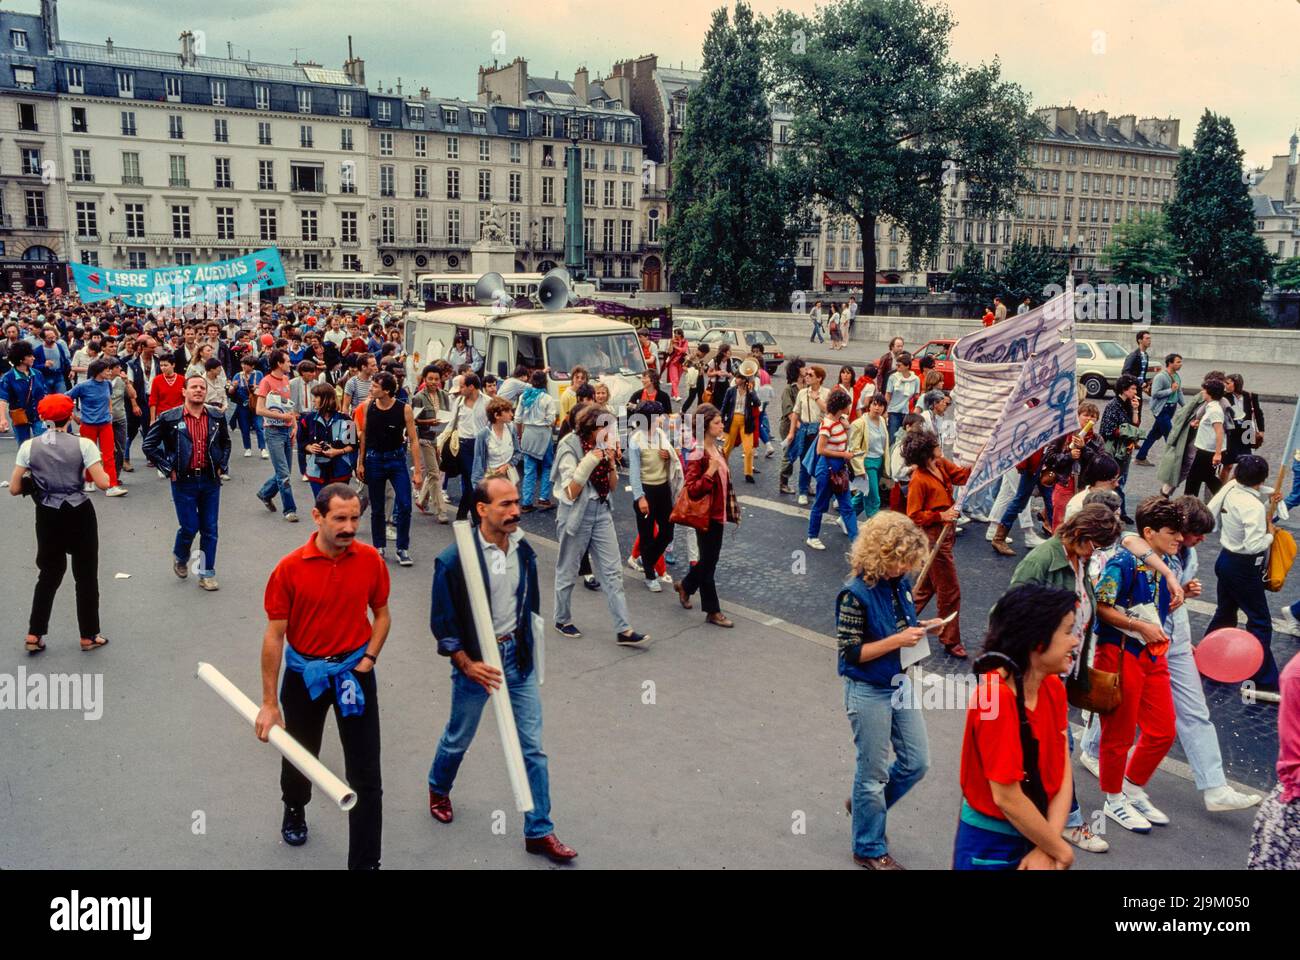 Paris, France, Large Crowd People Marching on Street LGBT Fierté, Gay Pride March, 1982, 1980s Archives France, gay protest vintage Stock Photo